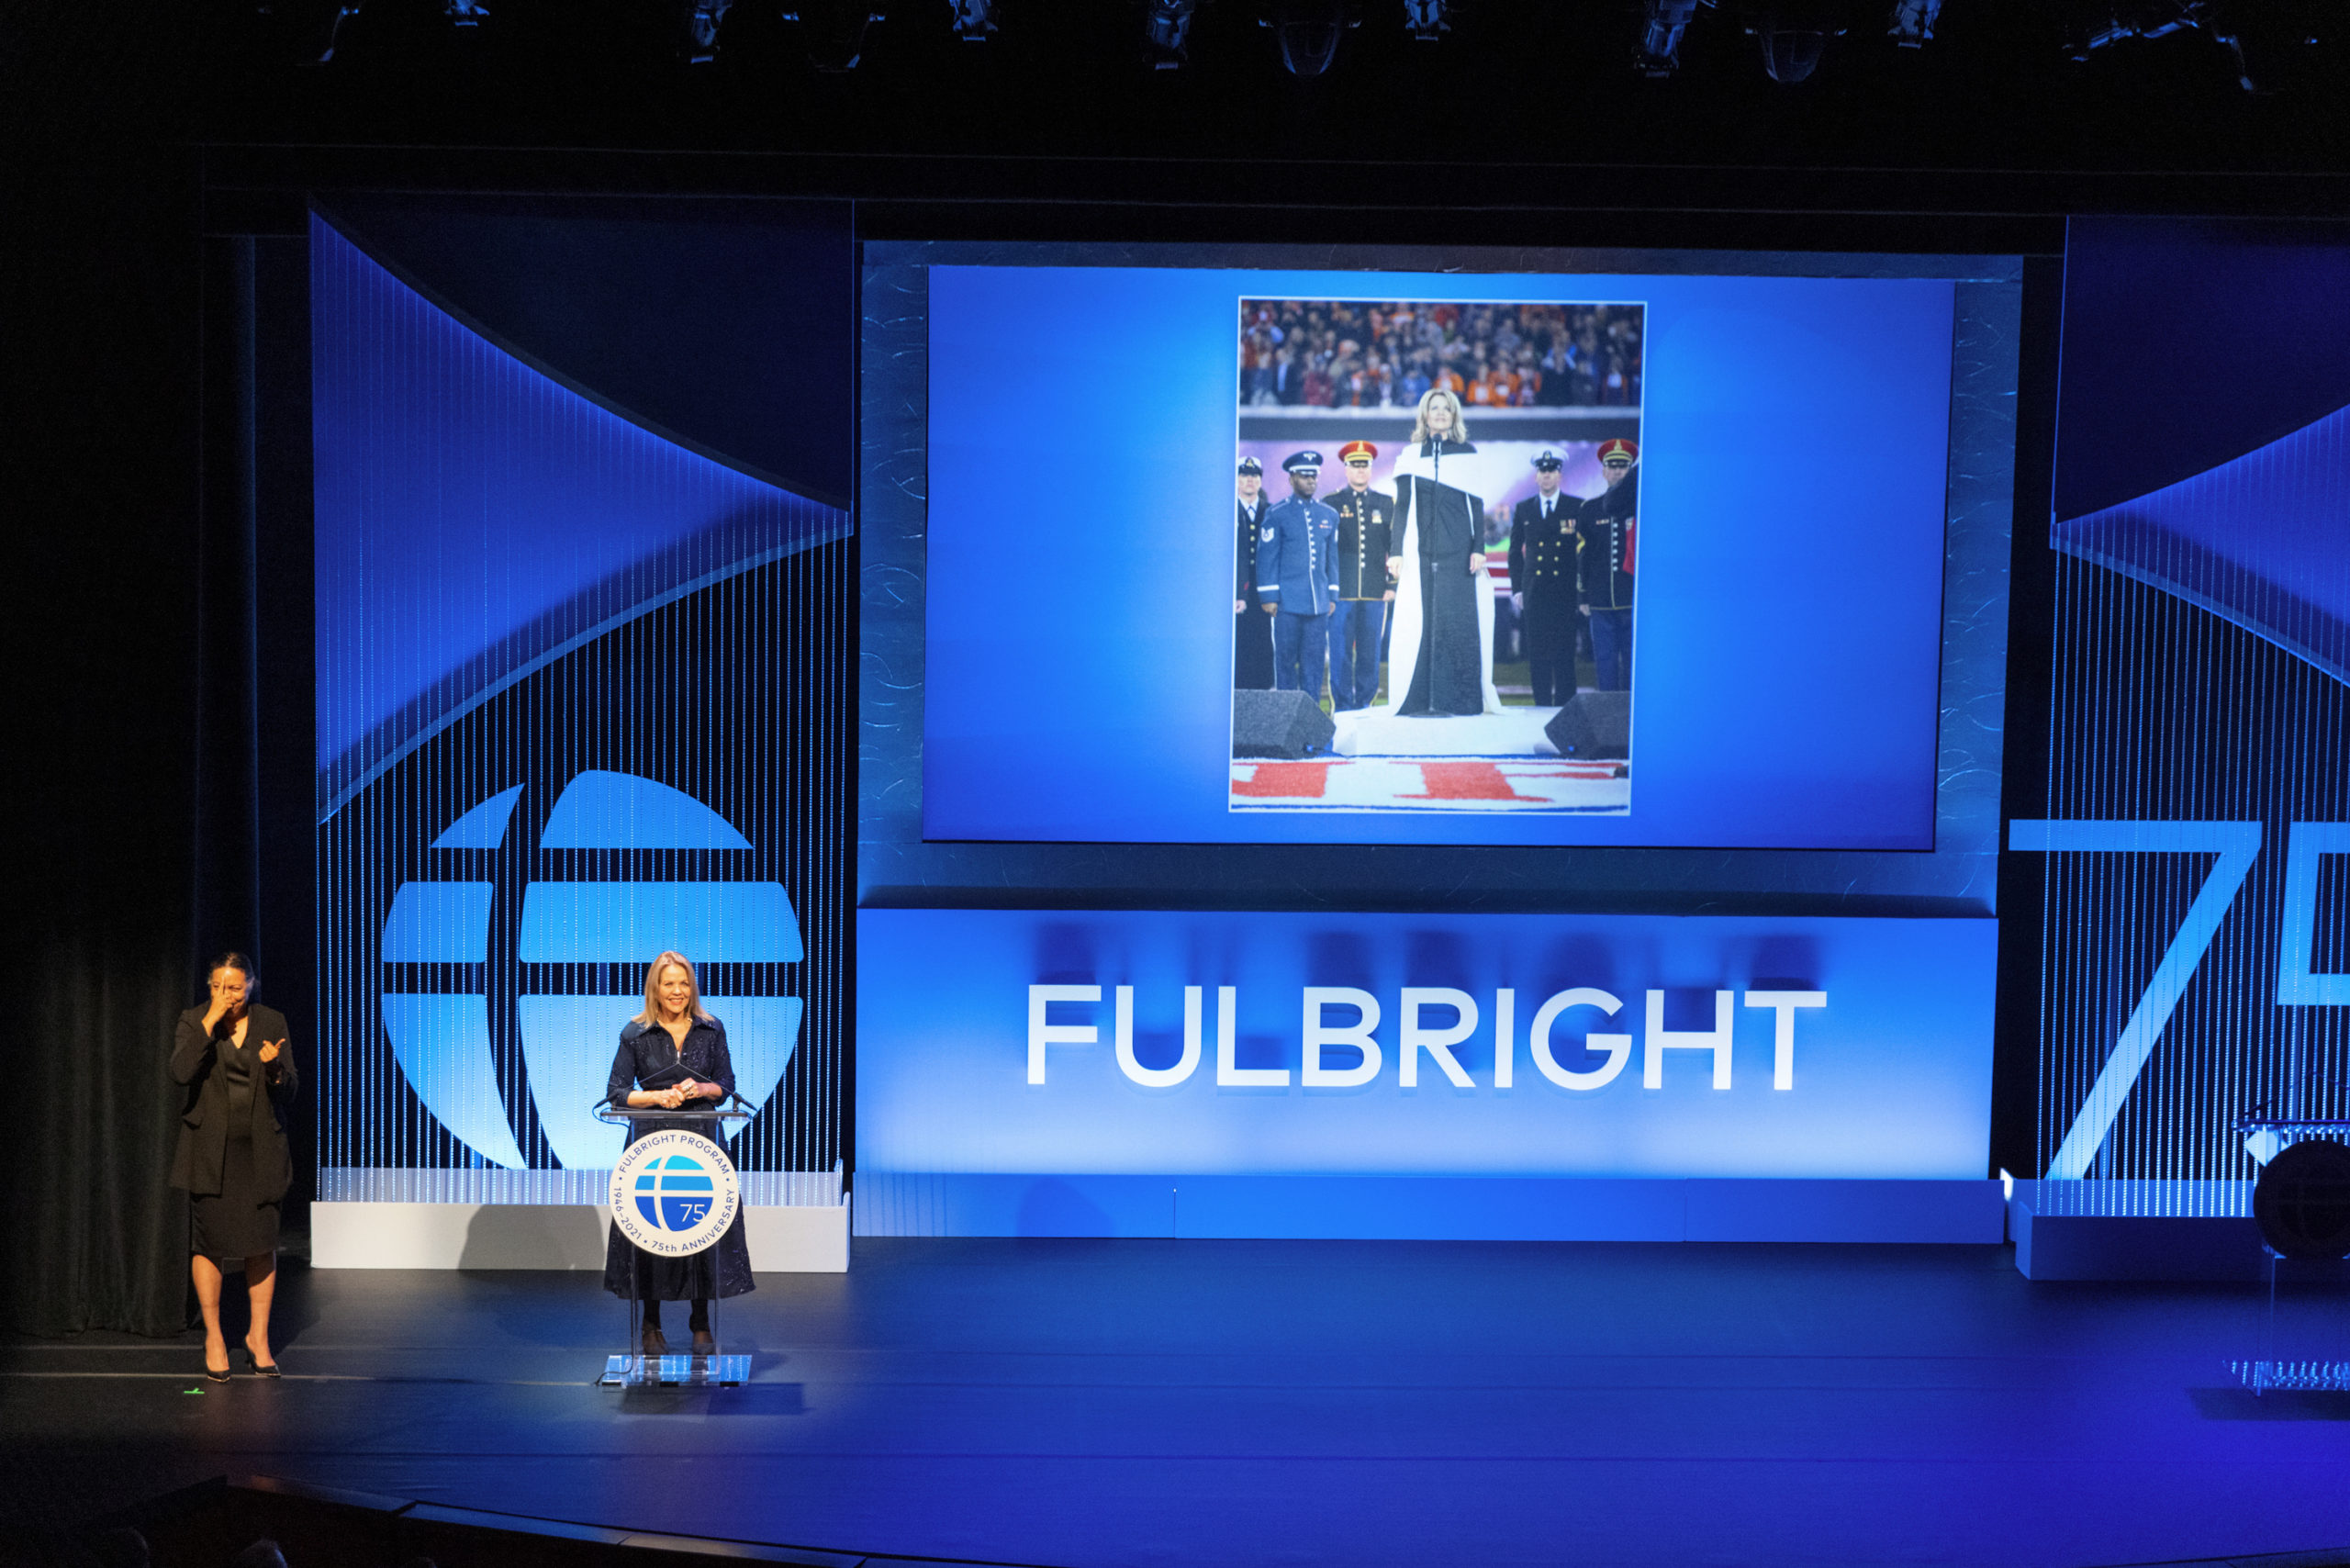 A person standing at a podium. The podium has a Fulbright logo on it and next to the person is "Fulbright" in big letters on the stage. A presentation is on a screen above them, with a photo of a person in graduation regalia.